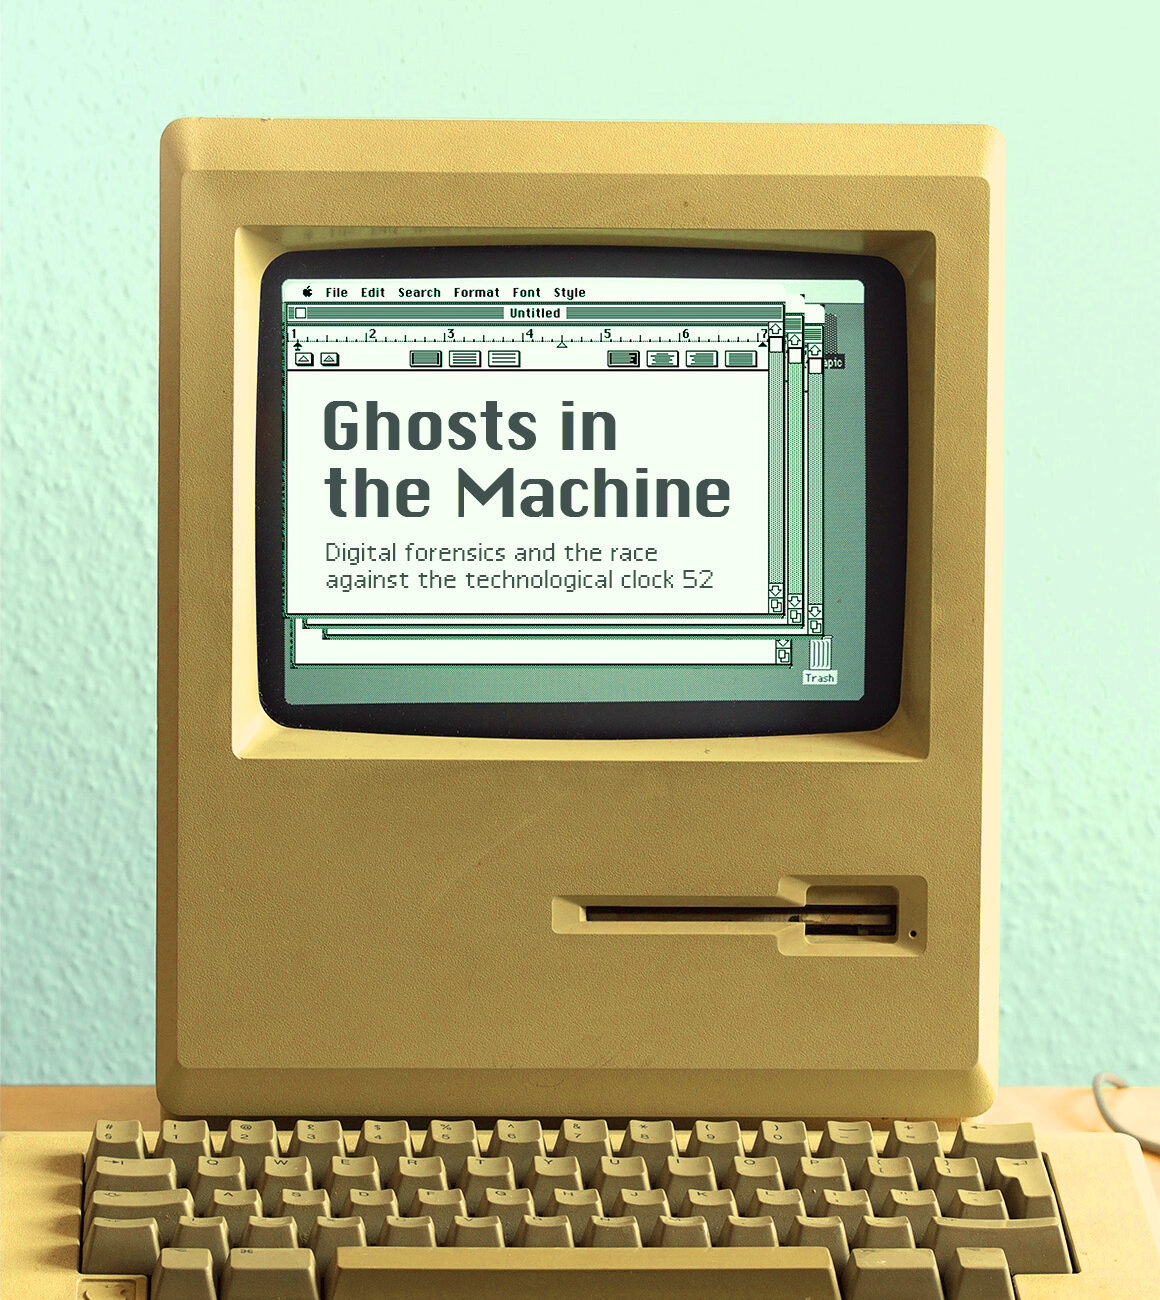 Ghosts in the Machine: Digital forensics and the race against the technological clock